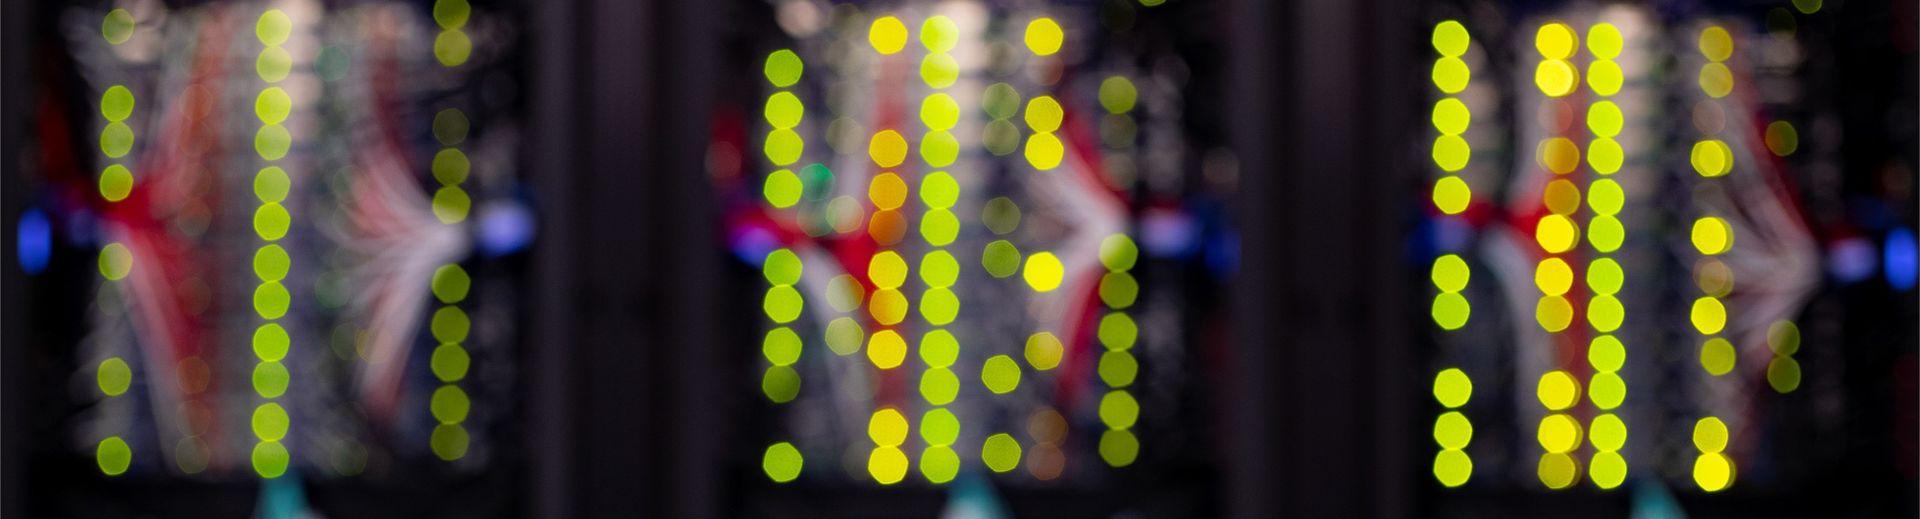 Blurred image of the back of computer servers resulting in a very primary colorscape with columns of bright yellow circles.